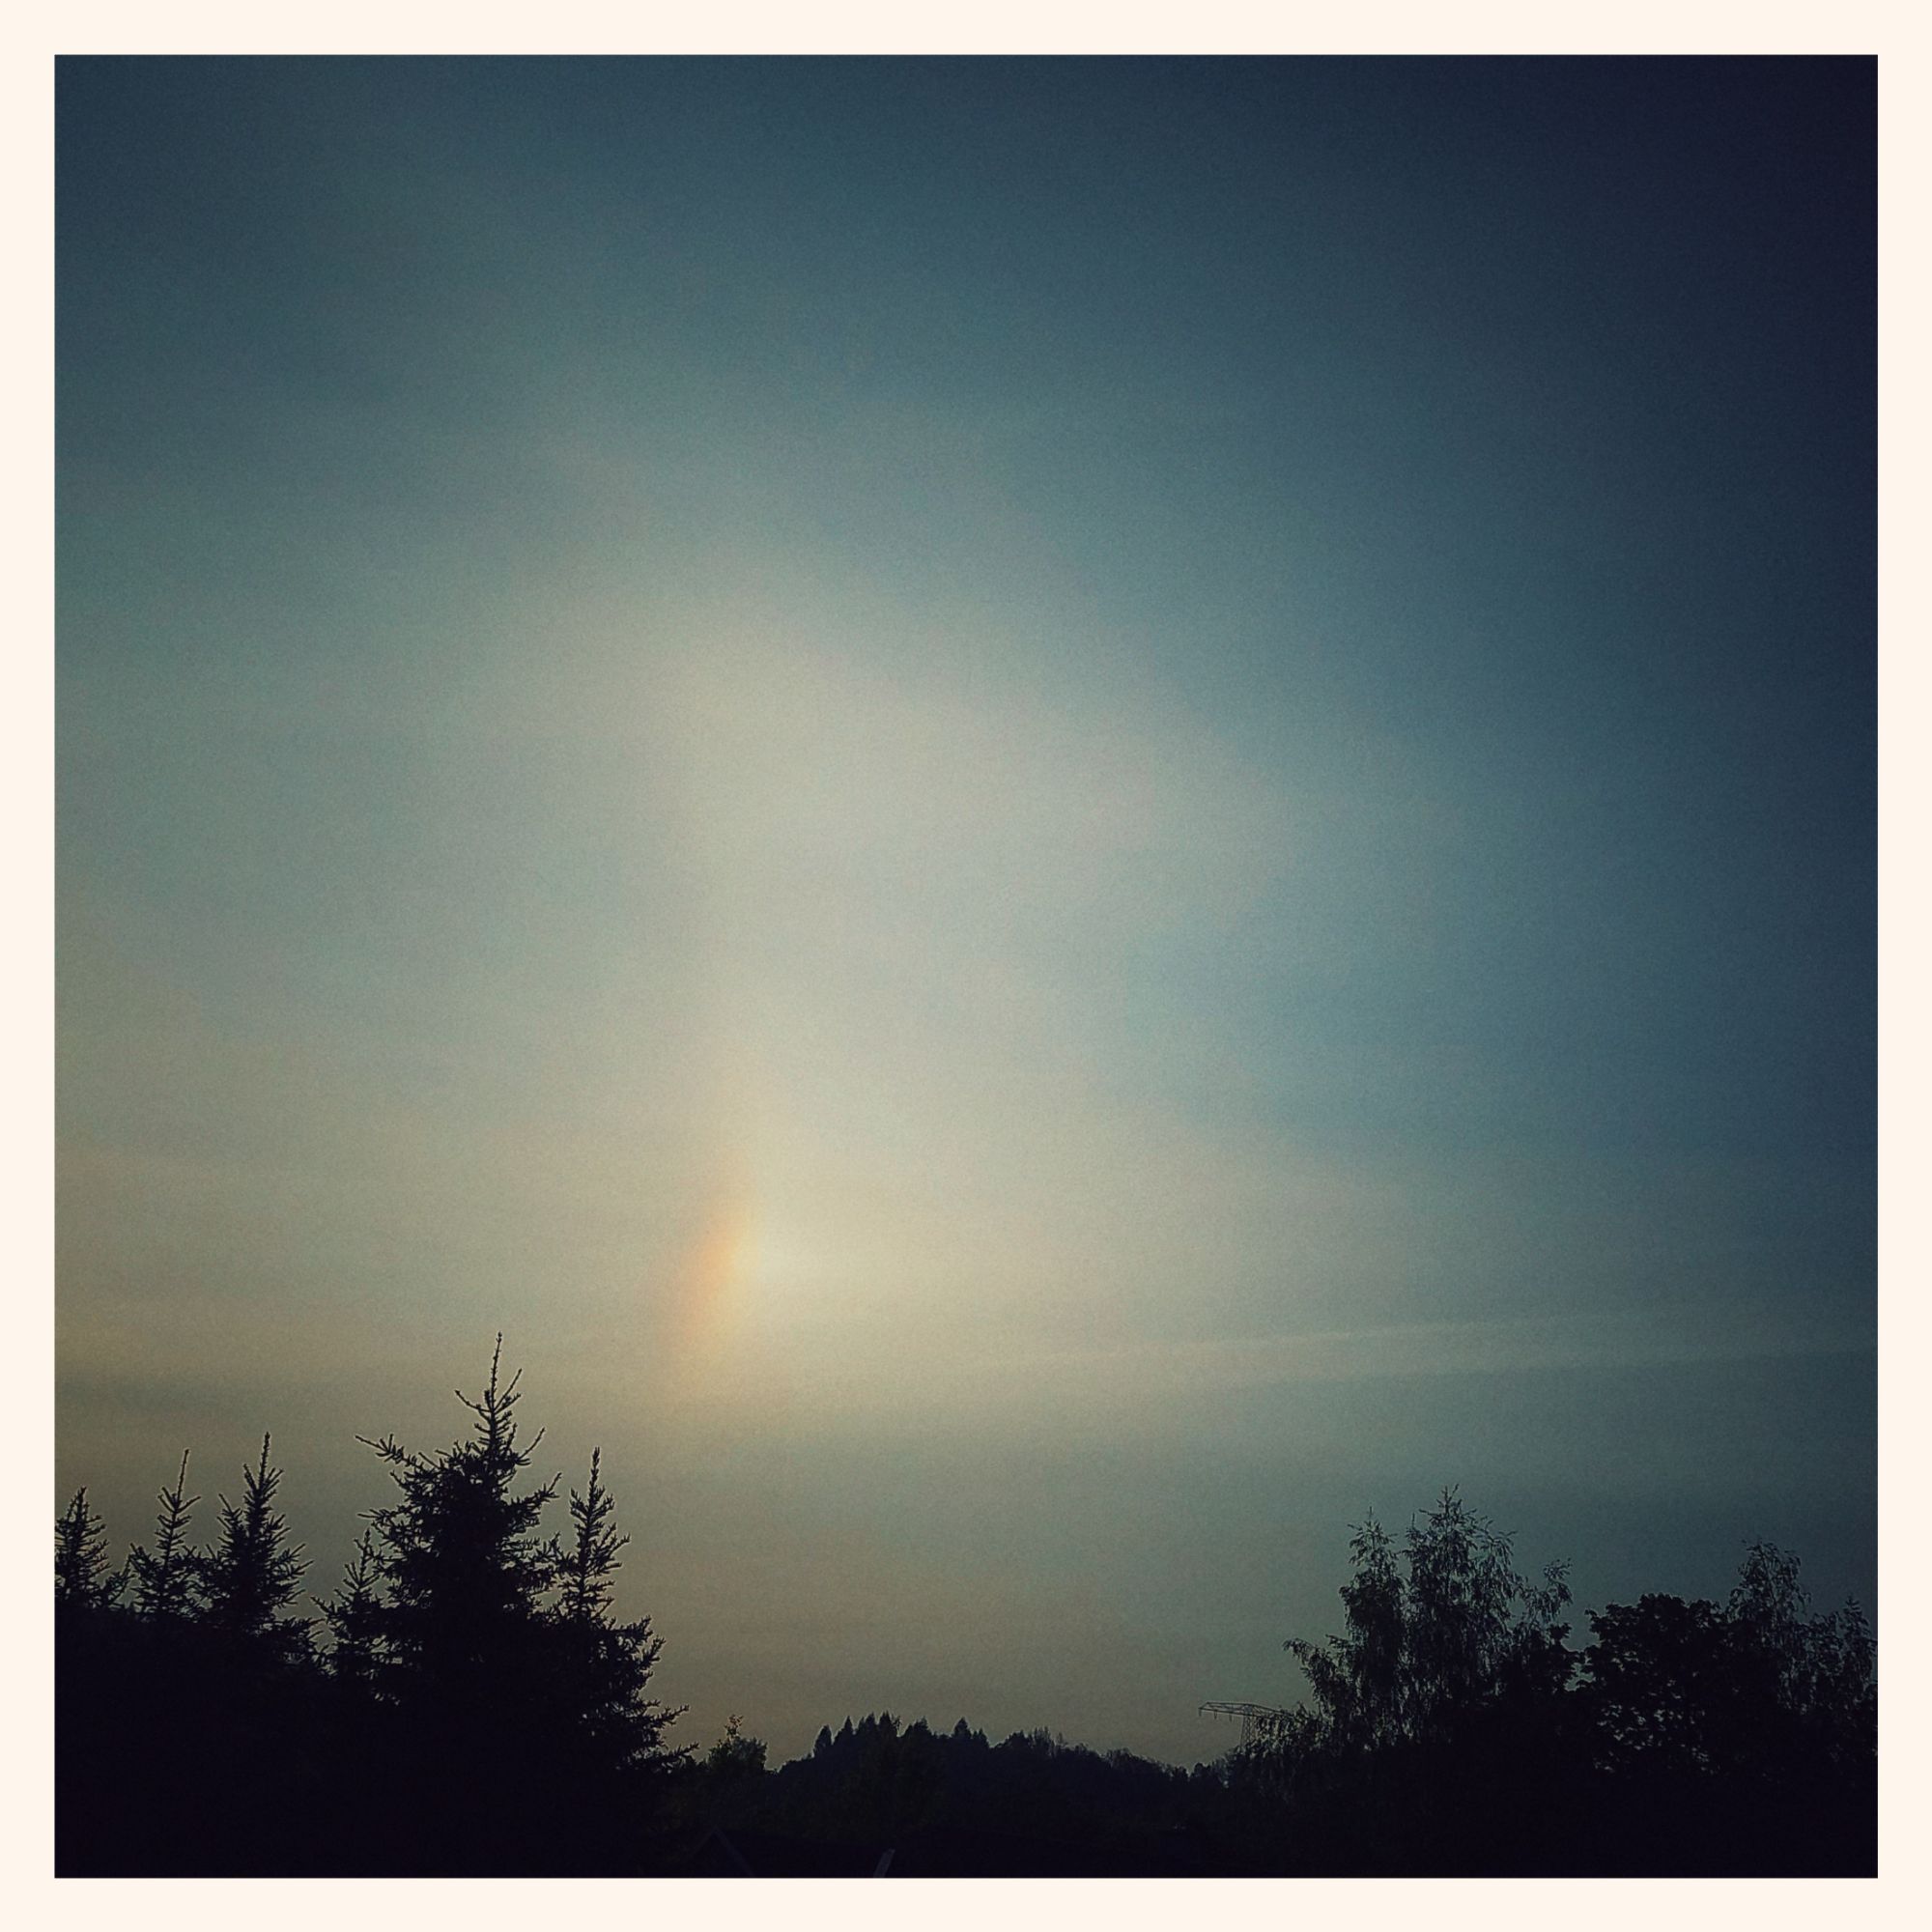 Morning sky above the forest. Sunrise and a rainbow flare.